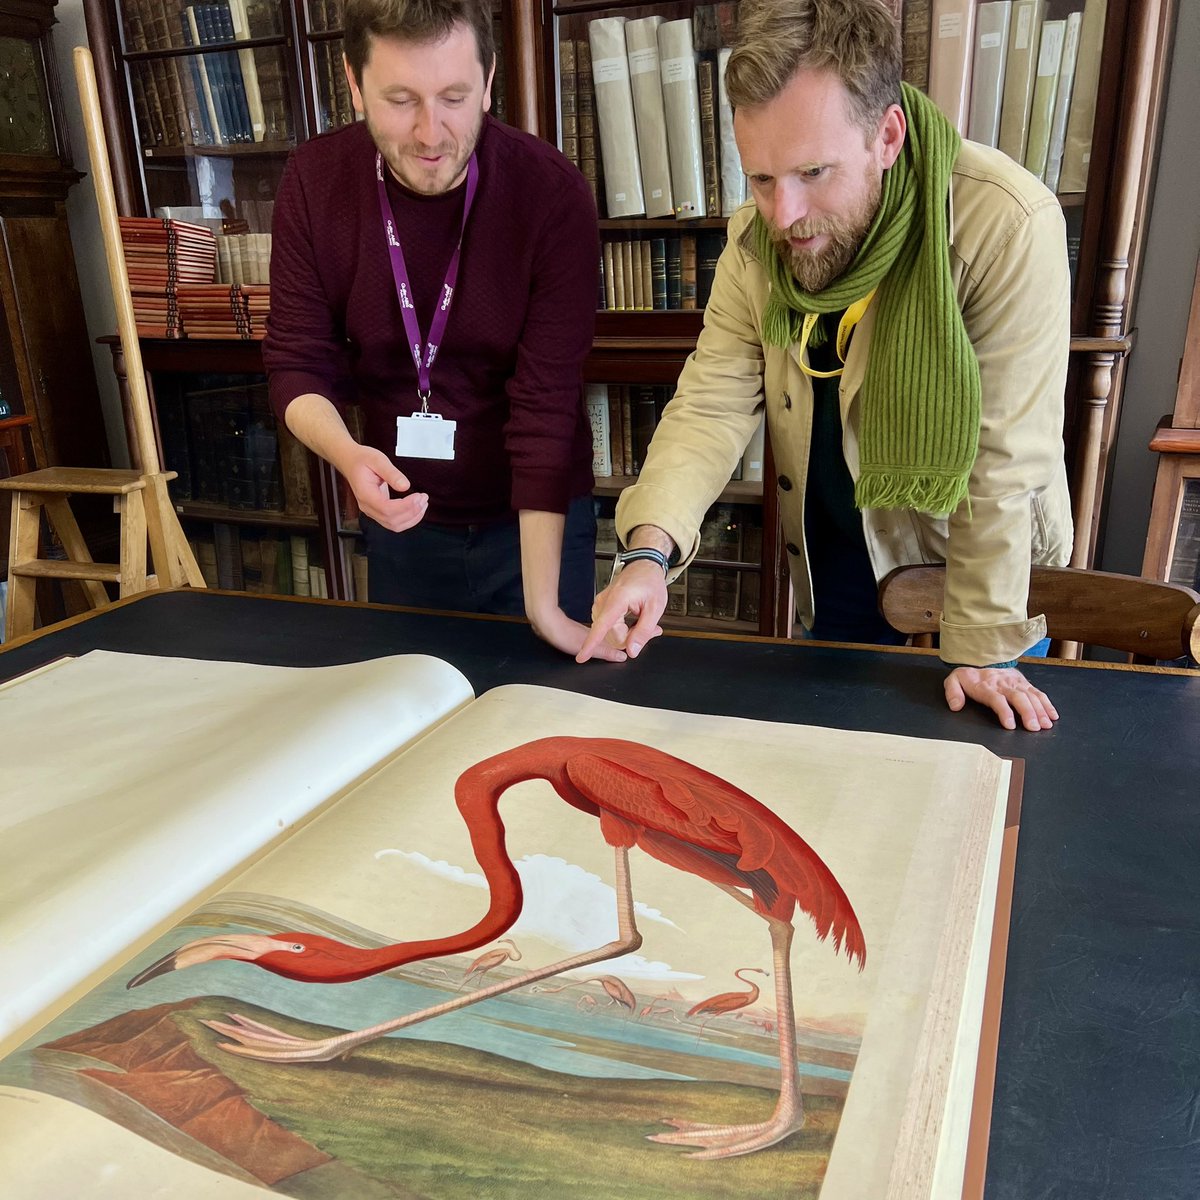 For a bird nerd (and book nerd) like me, this doesn’t get better! Thank you @GYlibrary for the very special morning with some very beautiful birds. 
💗💚💛💙💜

#audubon #americanflamingo #gsylitfest #nature #birdsofamerica  #phoenicopterusruber #thankyou @GuernseyLitFest